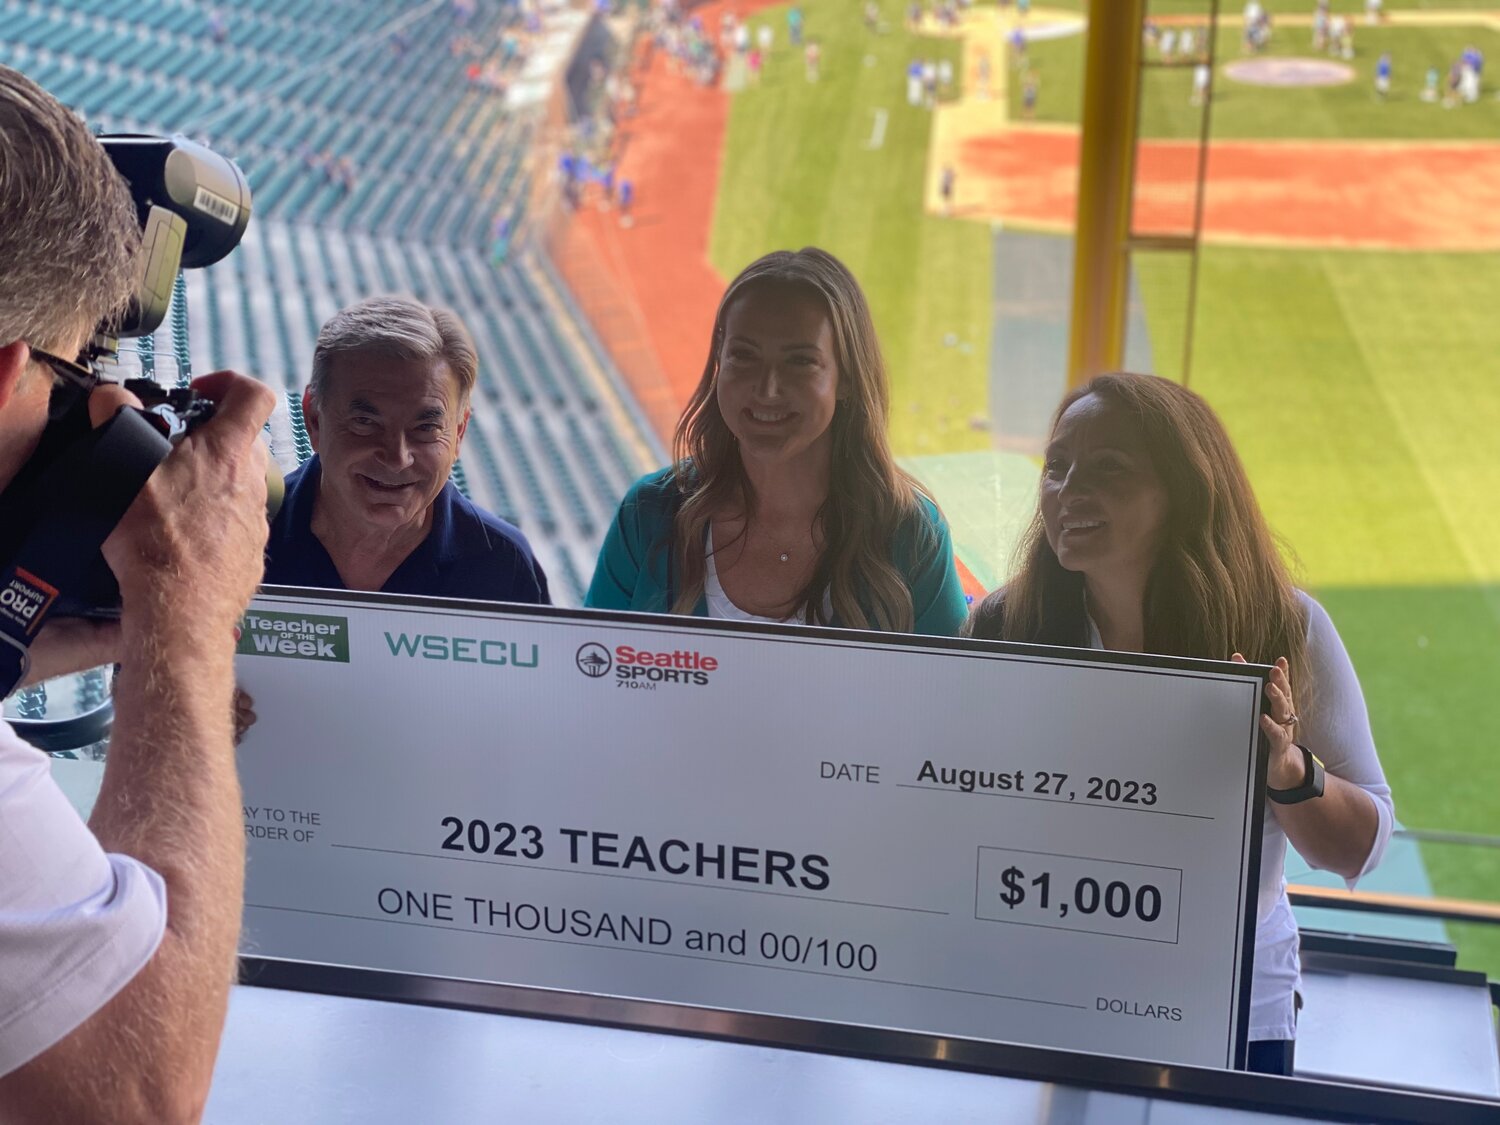 Shaden Beaber, pictured at center, was honored at a Seattle Mariners game on Aug. 27 and received a $1,000 award, $500 of which went to Lintott Elementary School as a classroom grant.